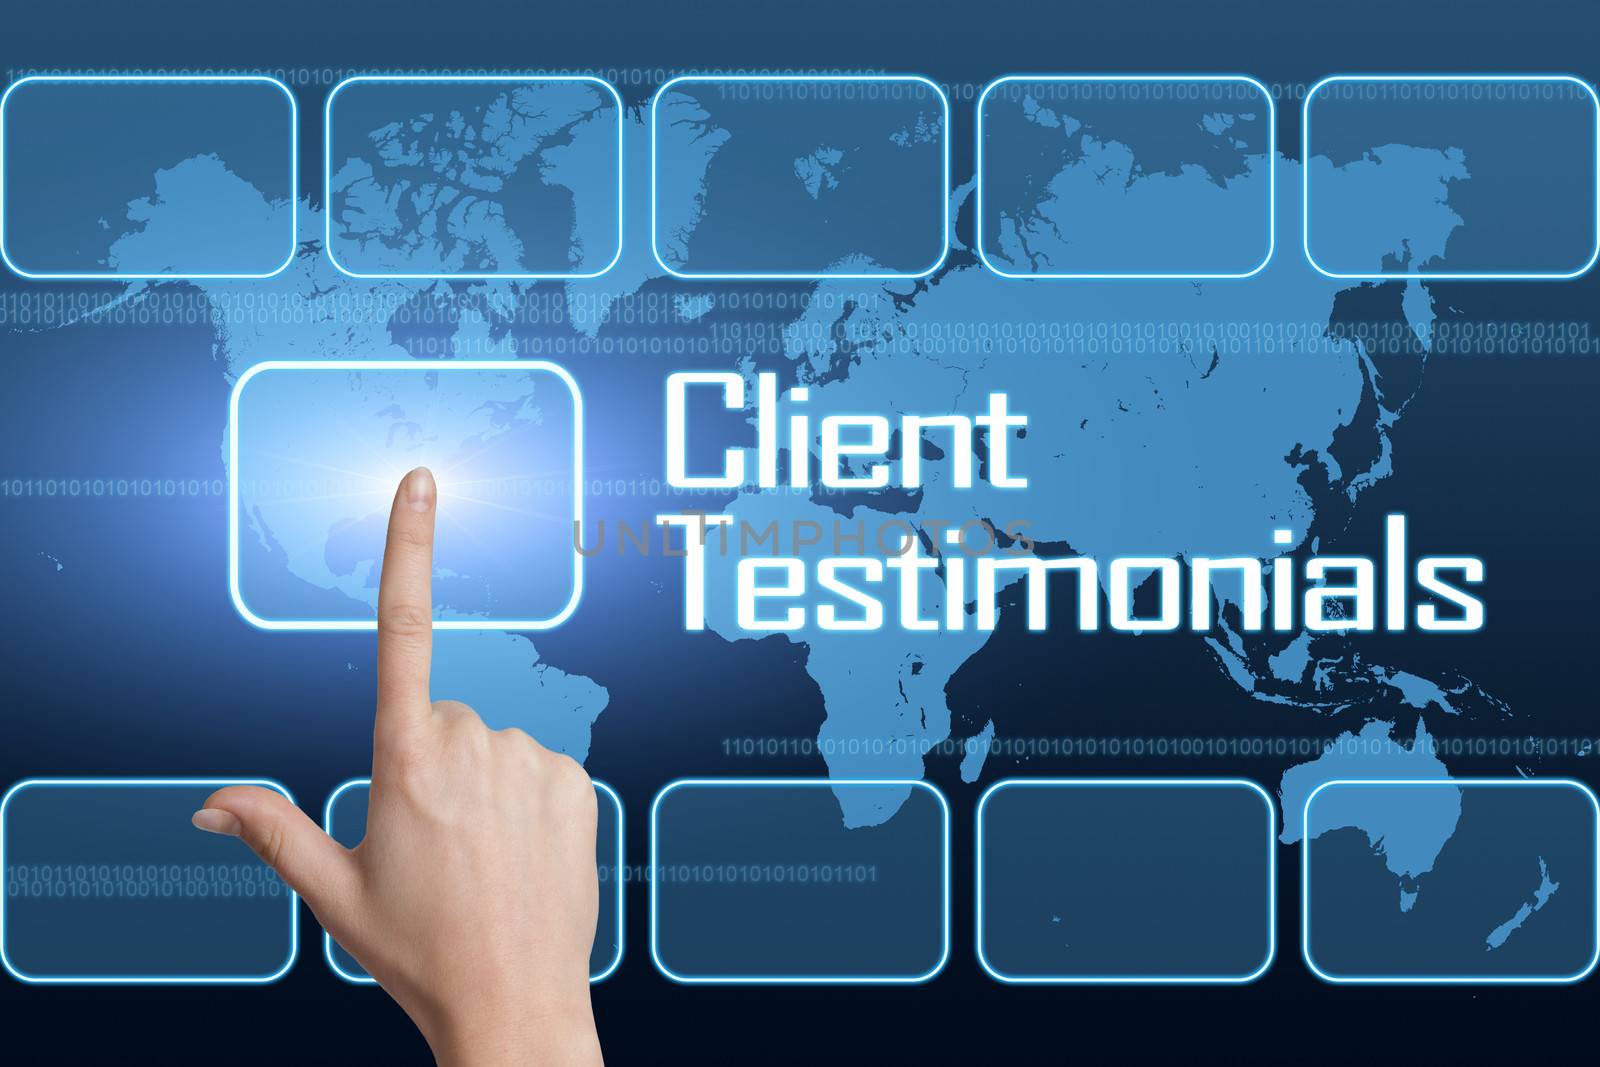 Client Testimonials concept with interface and world map on blue background